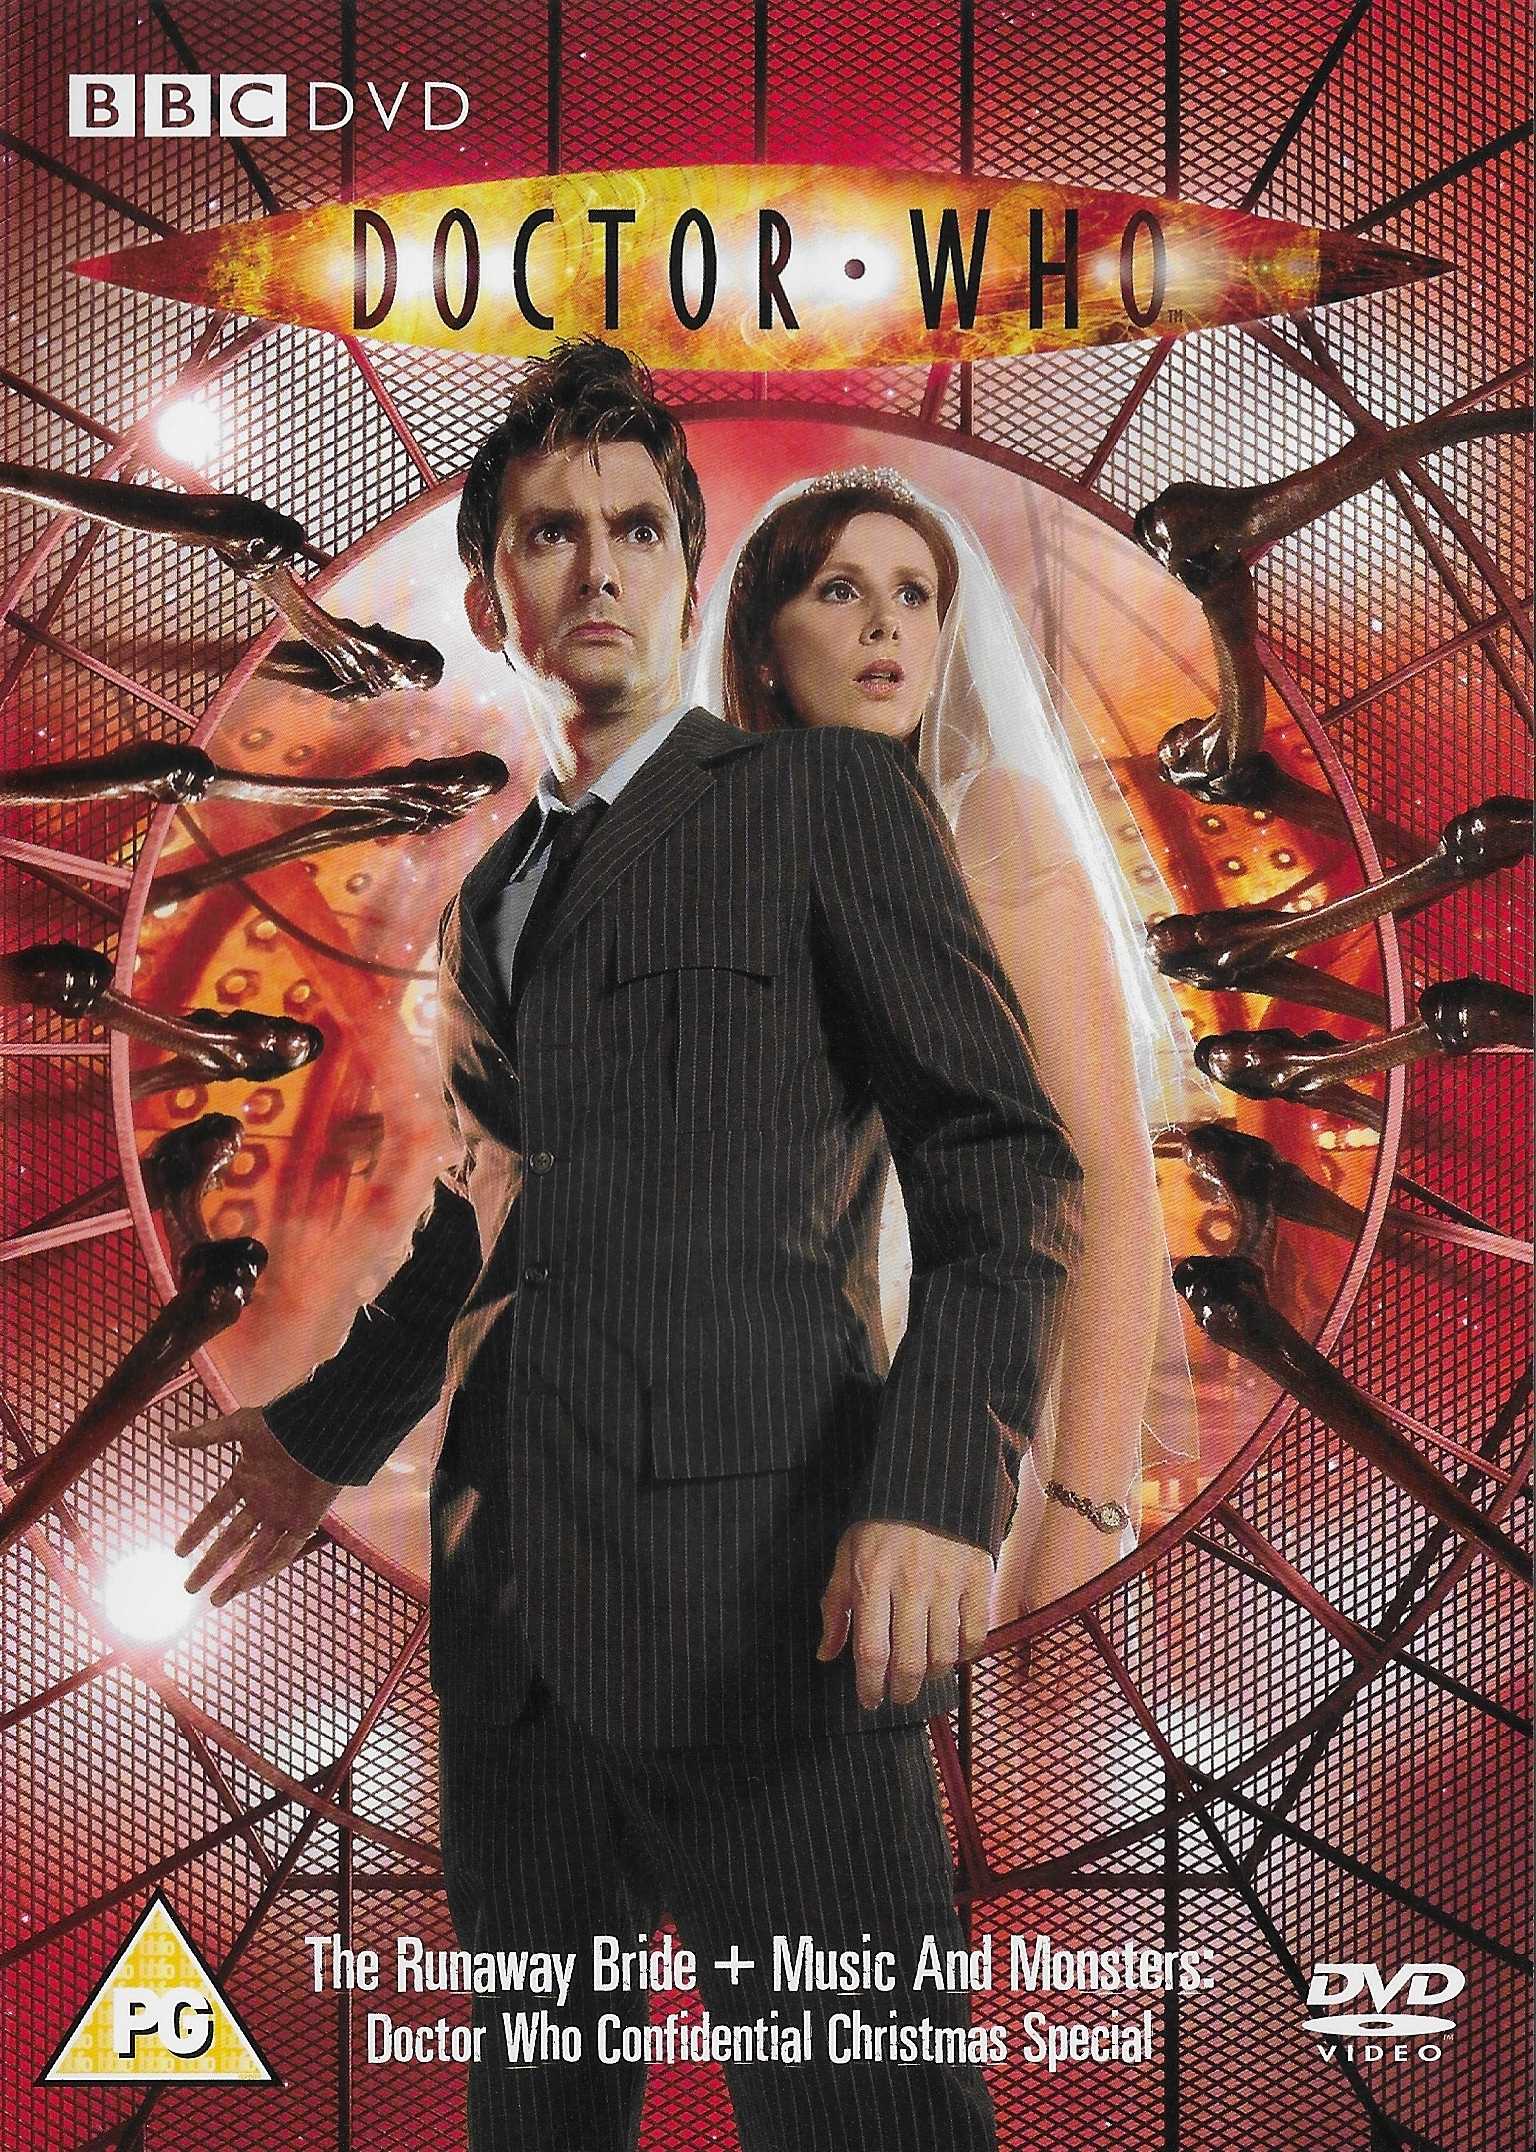 Picture of BBCDVD 2380 Doctor Who - Series 2, the runaway bride by artist Russell T Davies from the BBC dvds - Records and Tapes library